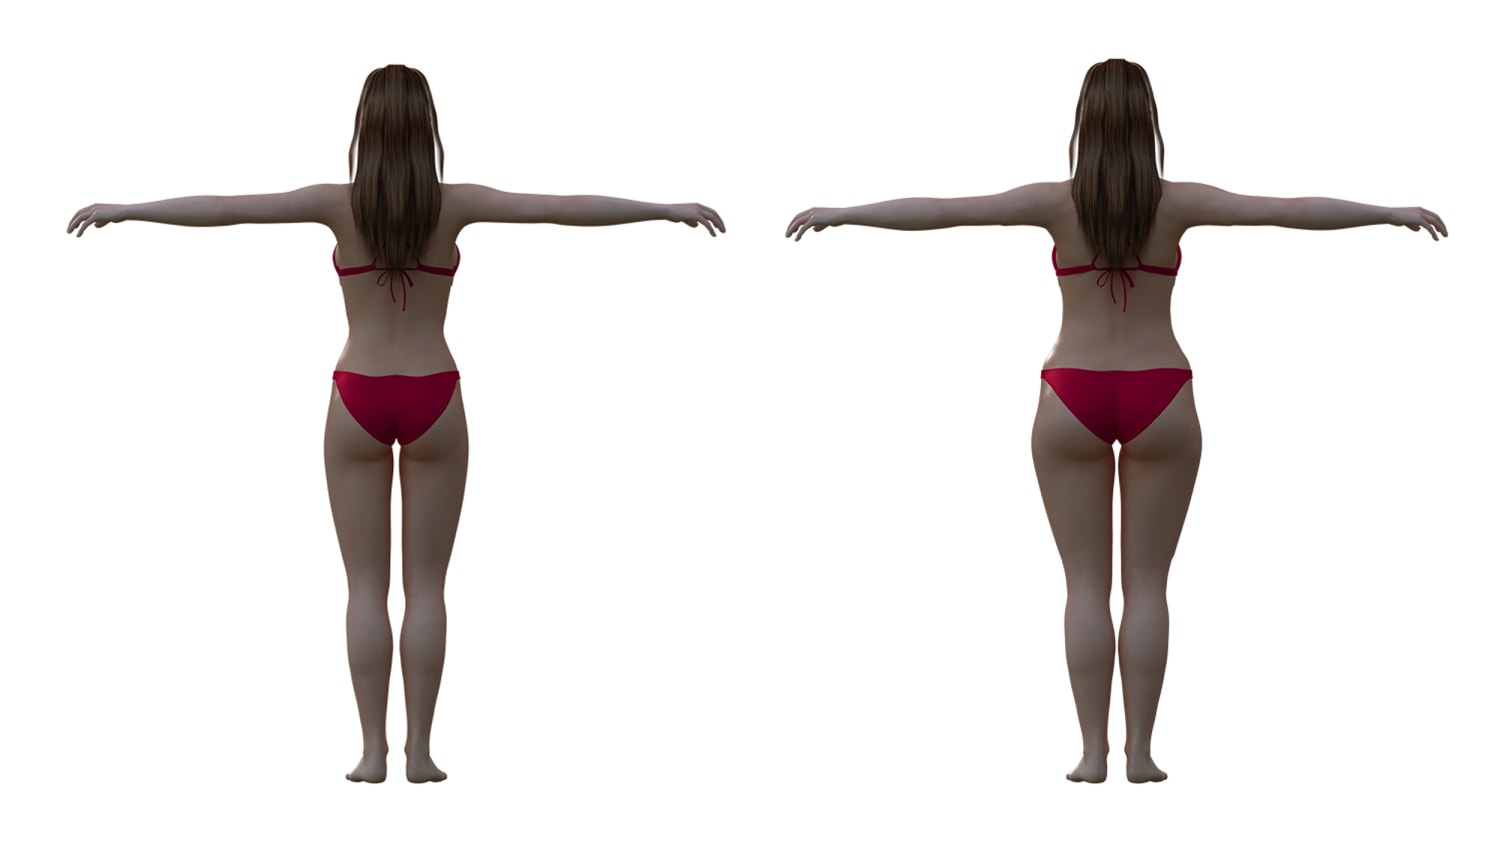 Women: Do you have the ideal figure? Here's what 'they' thought in